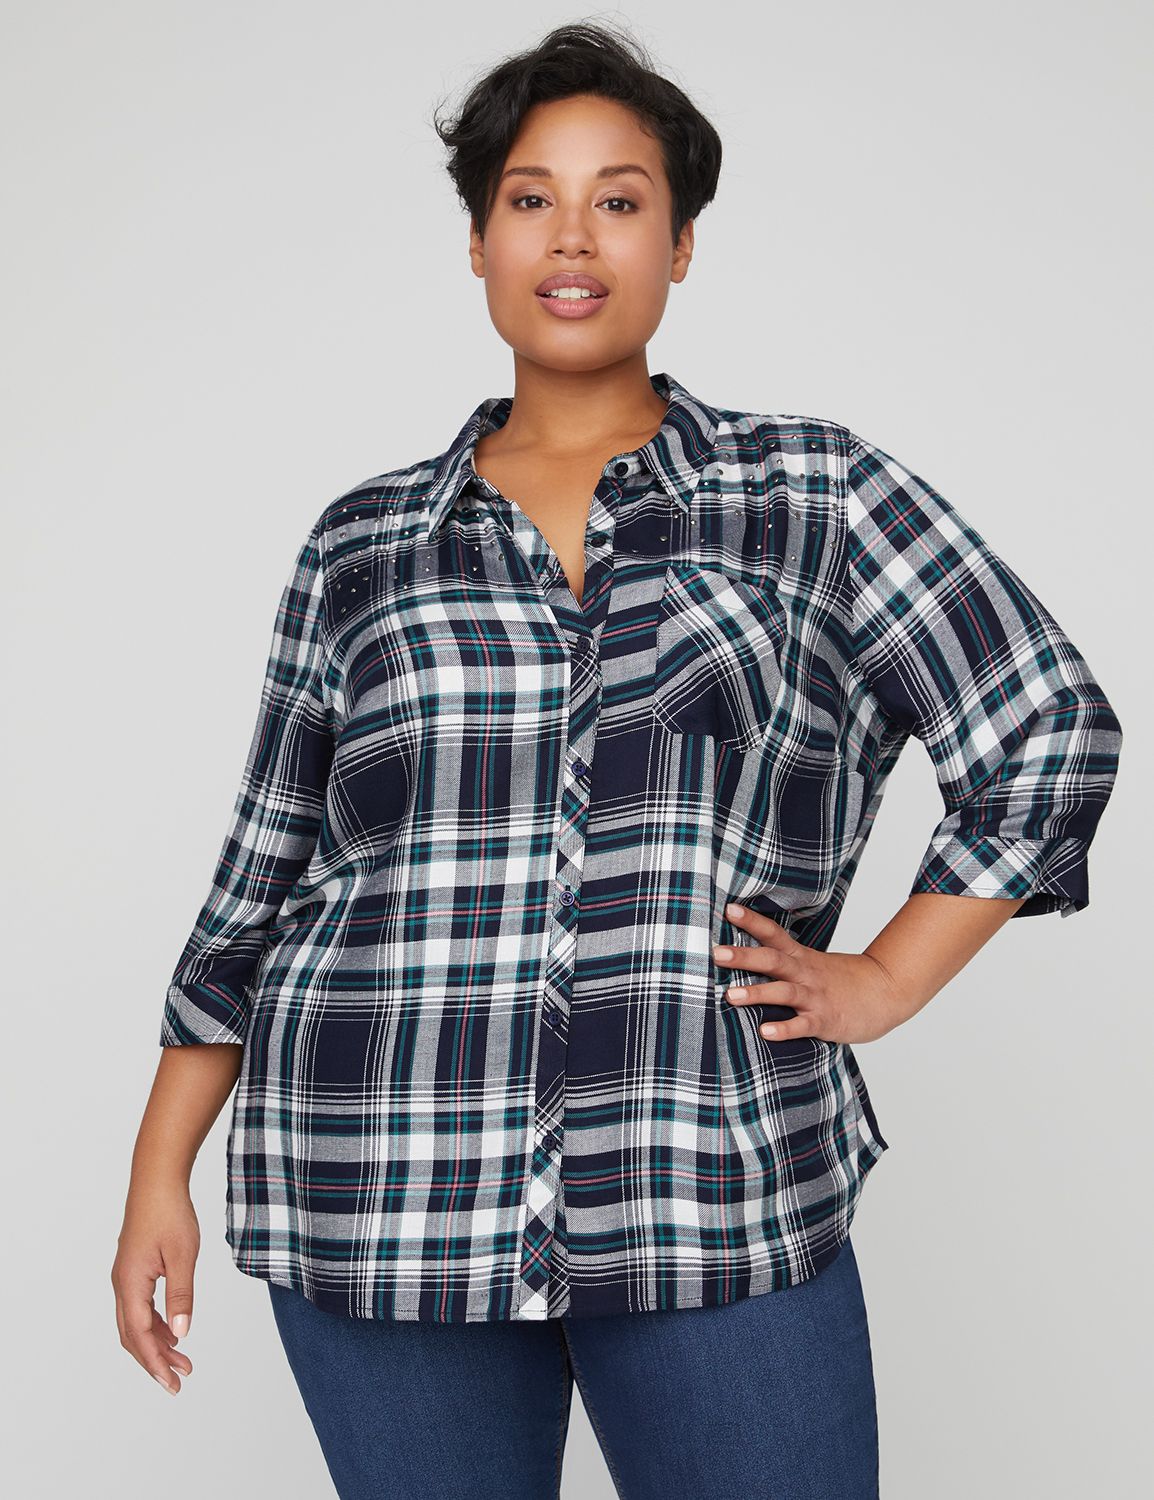 Women's Plus Size Blouses & Dressy Shirts | Catherines